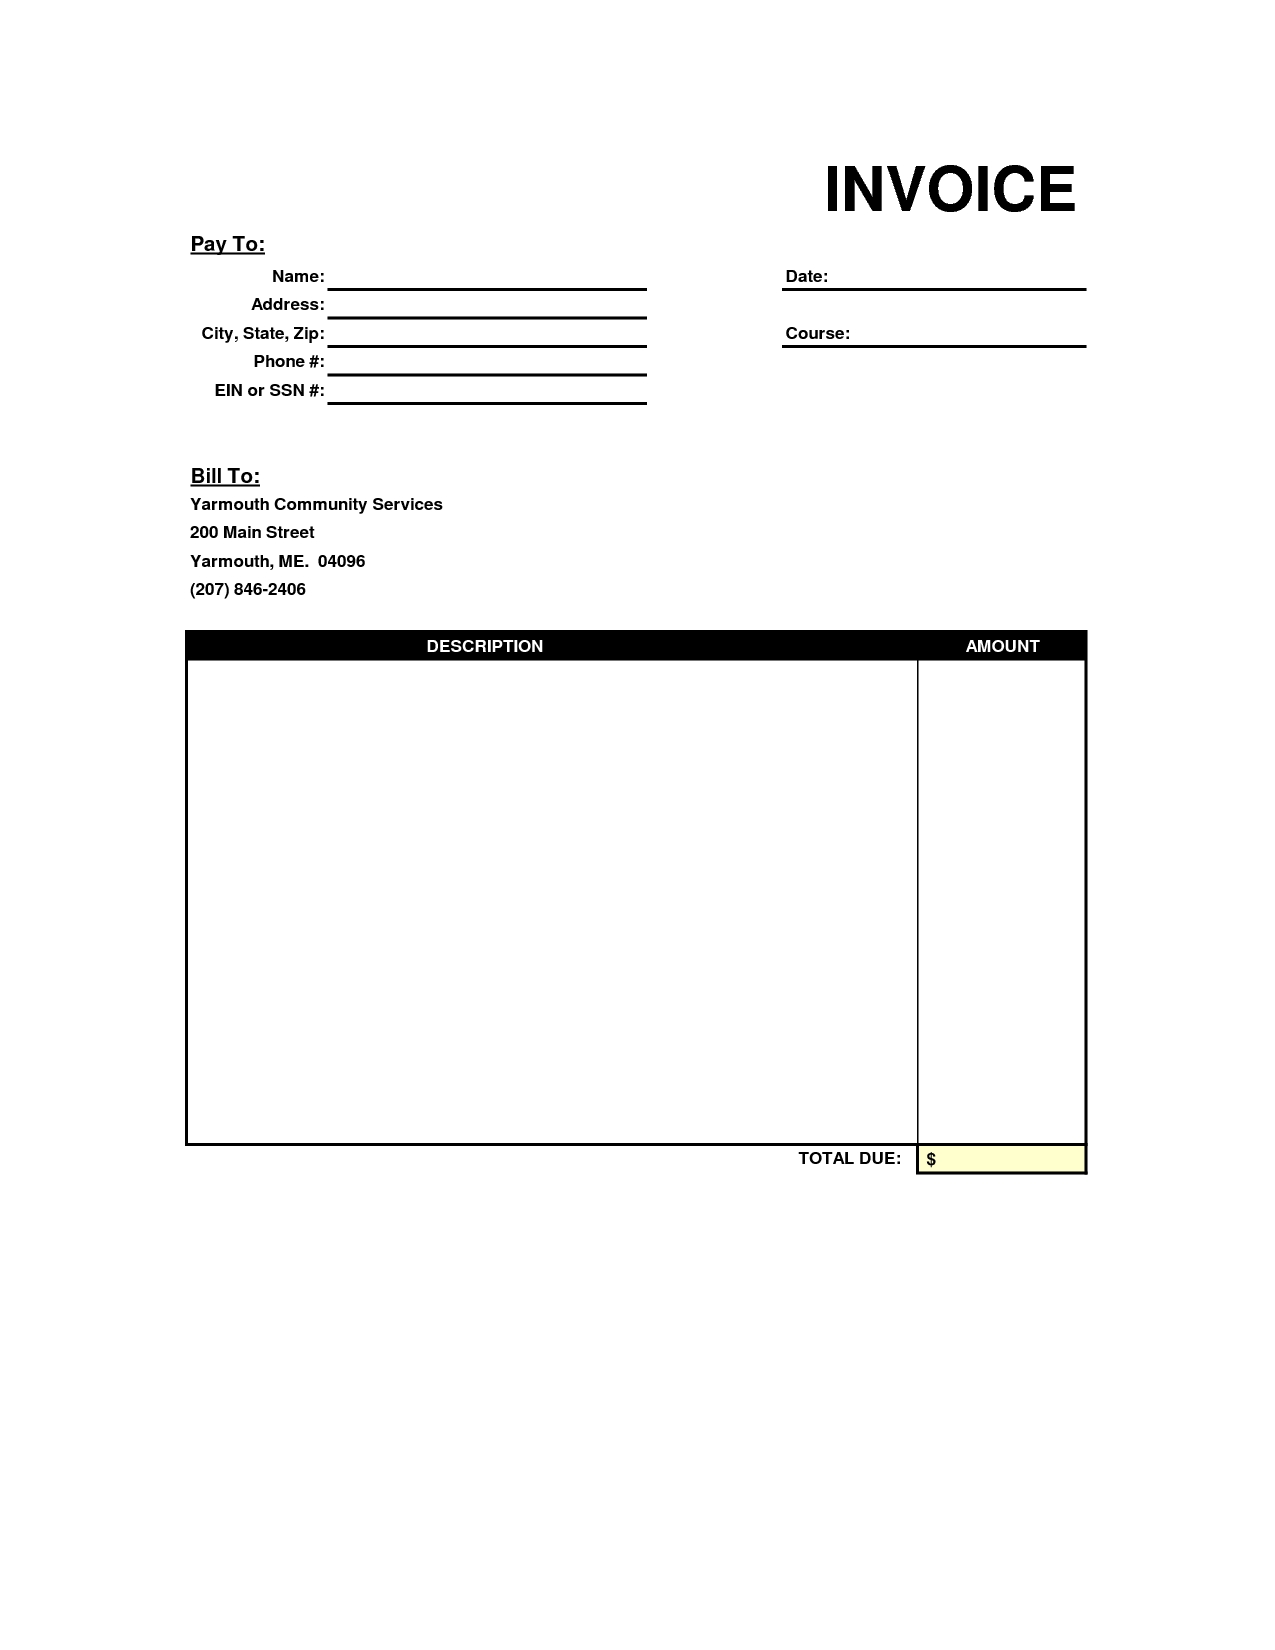 blank invoice template blank invoice blank invoice template excel